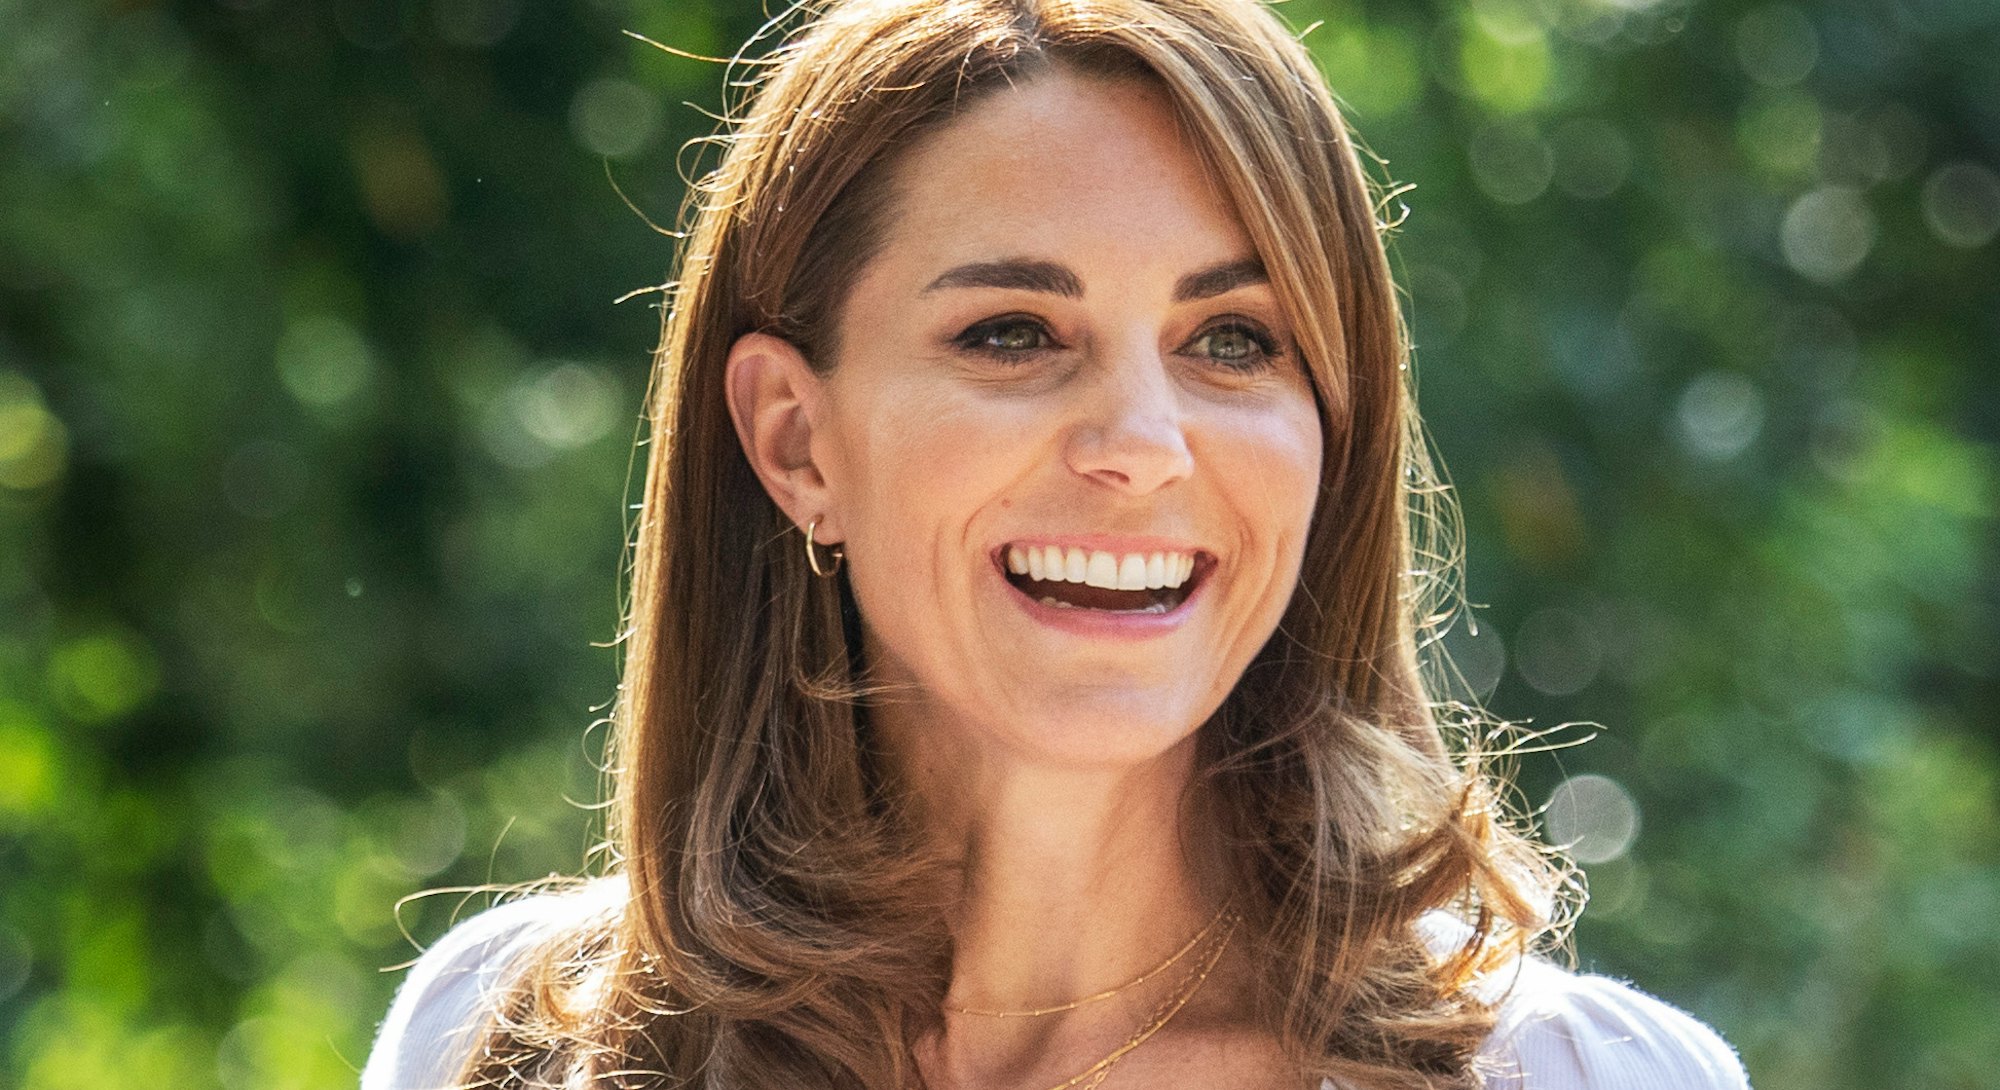 Over the years, Kate Middleton has said a number of candid and refreshing things about motherhood.  